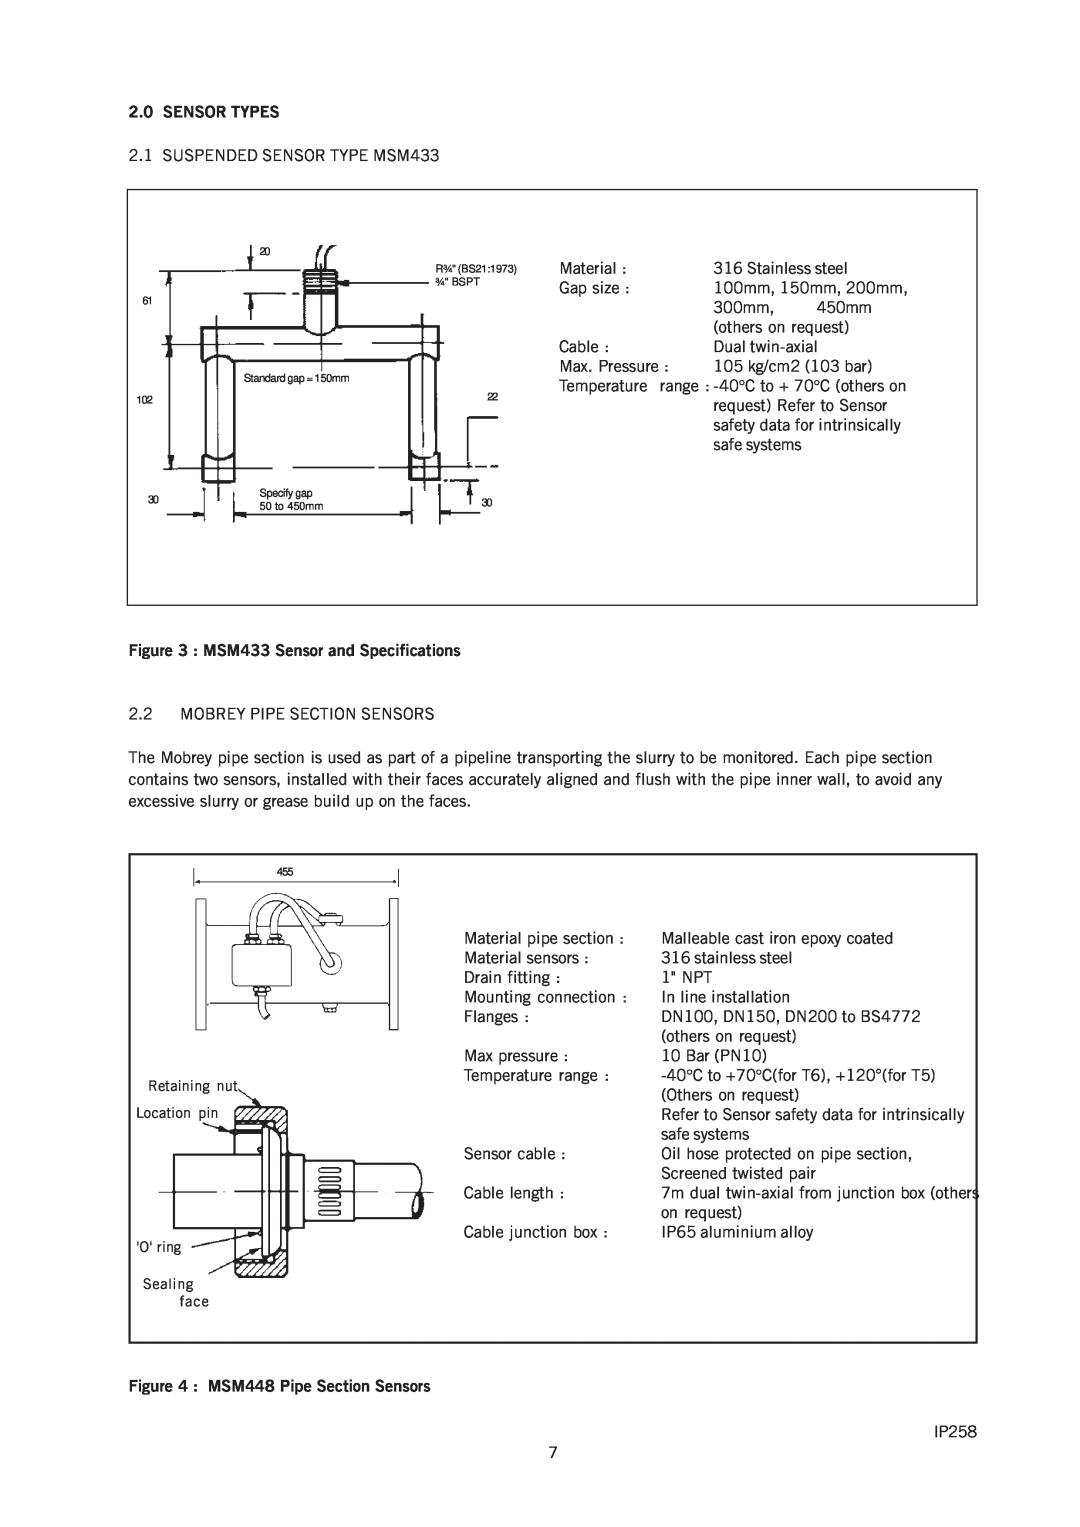 Emerson IP258 manual Sensor Types, MSM433 Sensor and Specifications, MSM448 Pipe Section Sensors, 100mm, 150mm, 200mm 